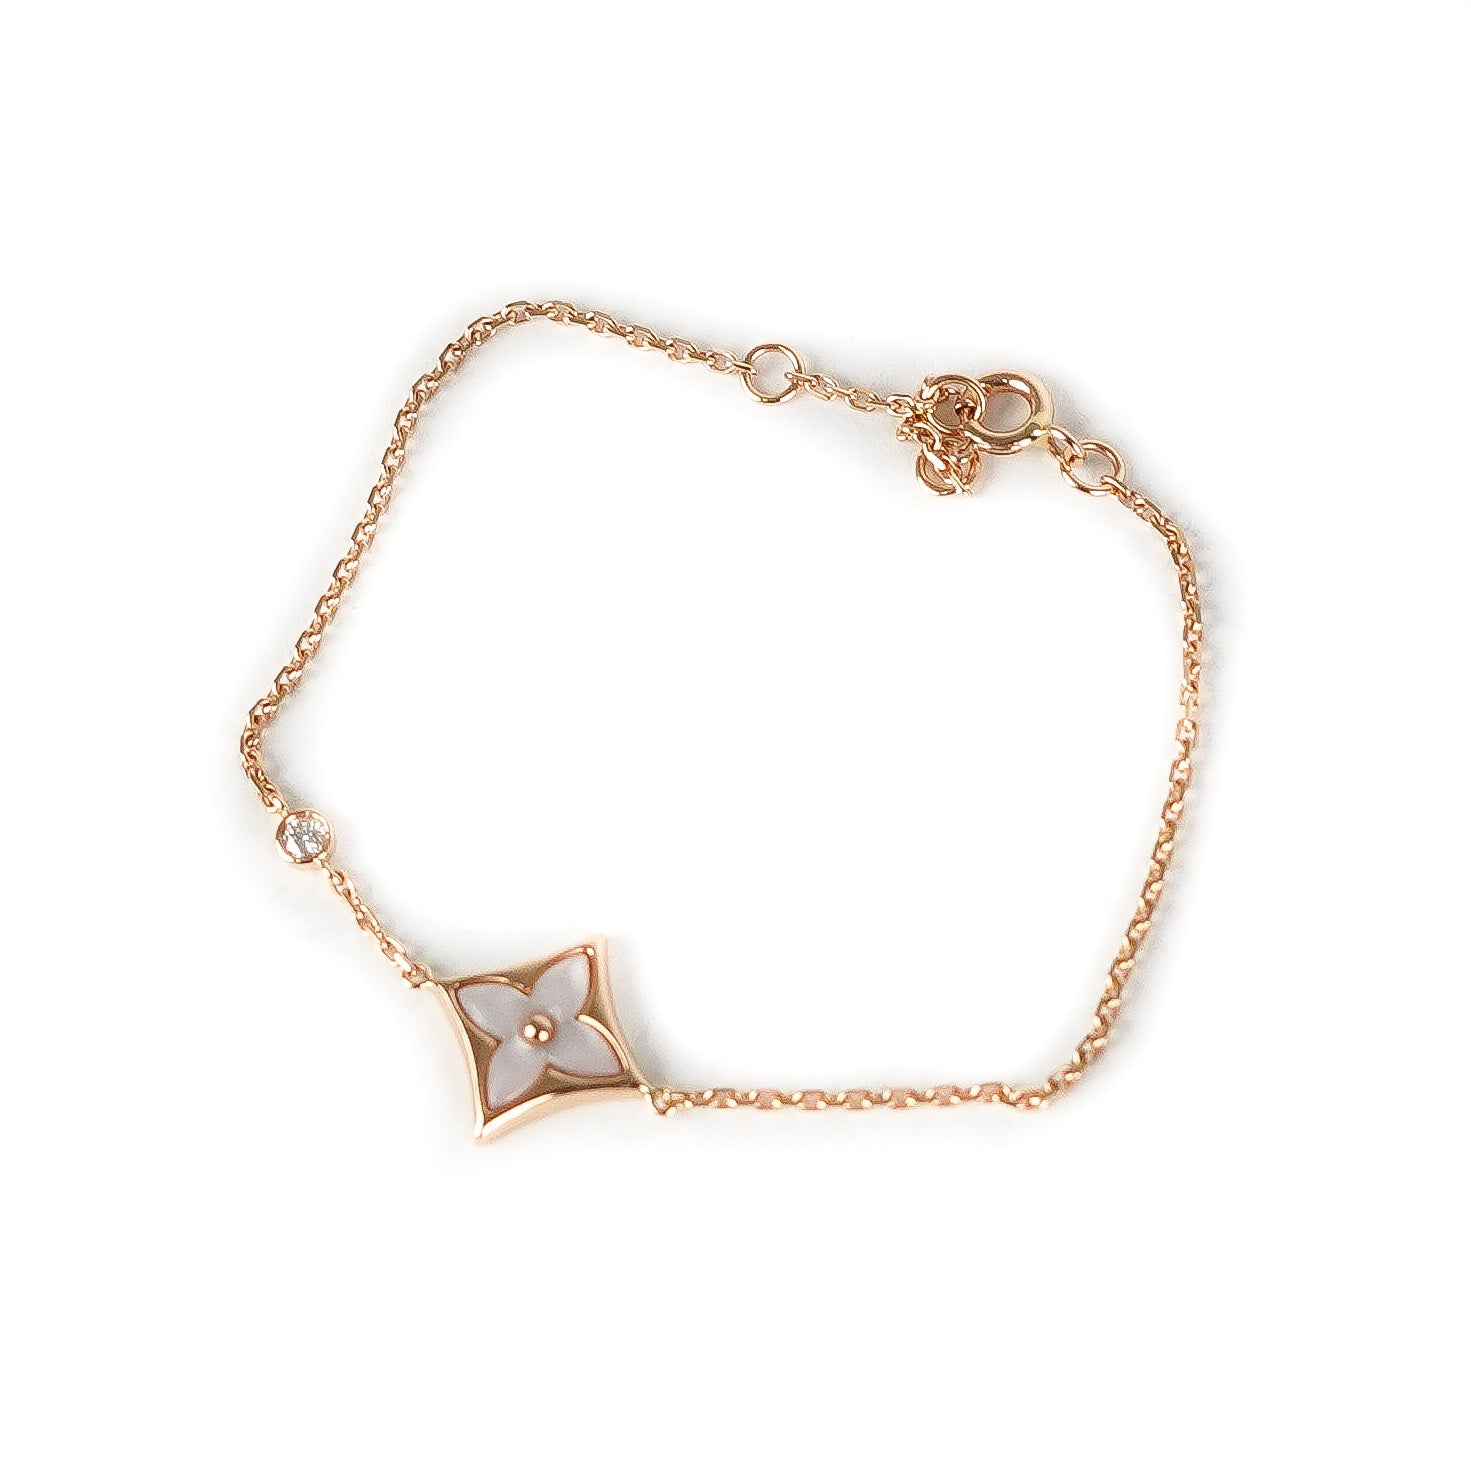 Louis Vuitton® Color Blossom BB Star Bracelet, Pink Gold, Pink  Mother-of-pearl And Diamond Pink. Size Nsa